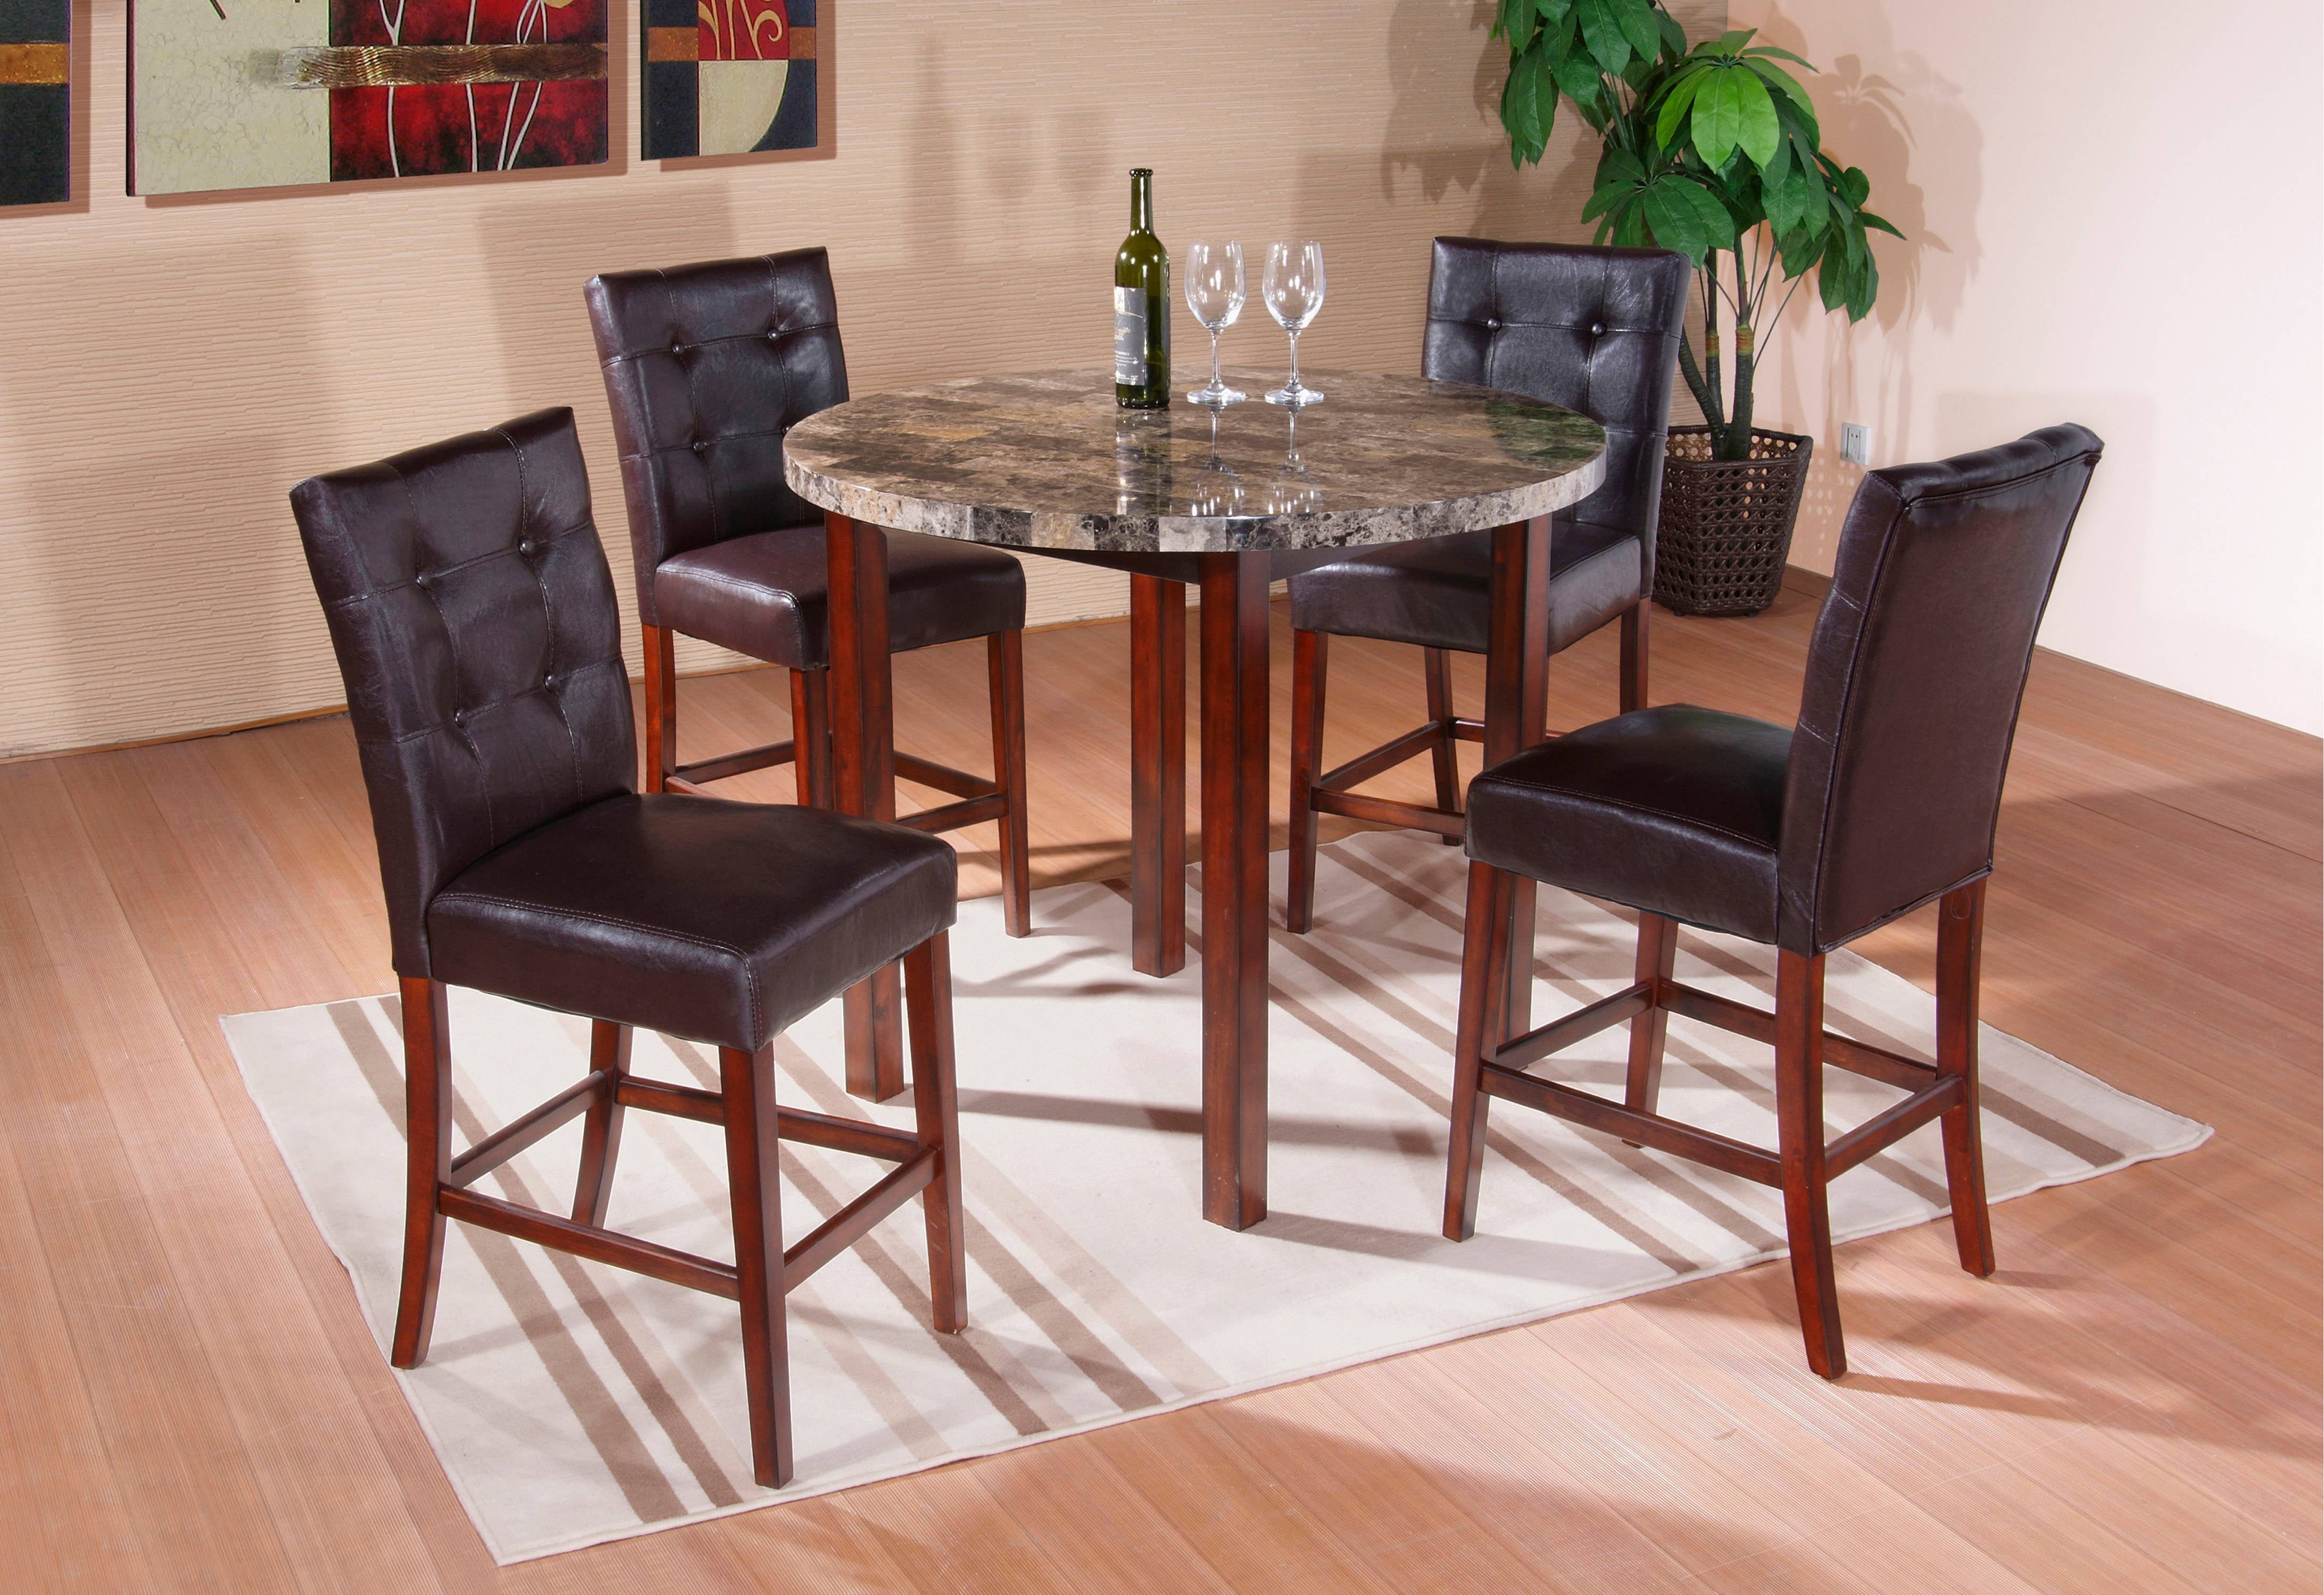 Dining Room Walmart - Dining Room: Walmart Dining Room Chairs For Cozy